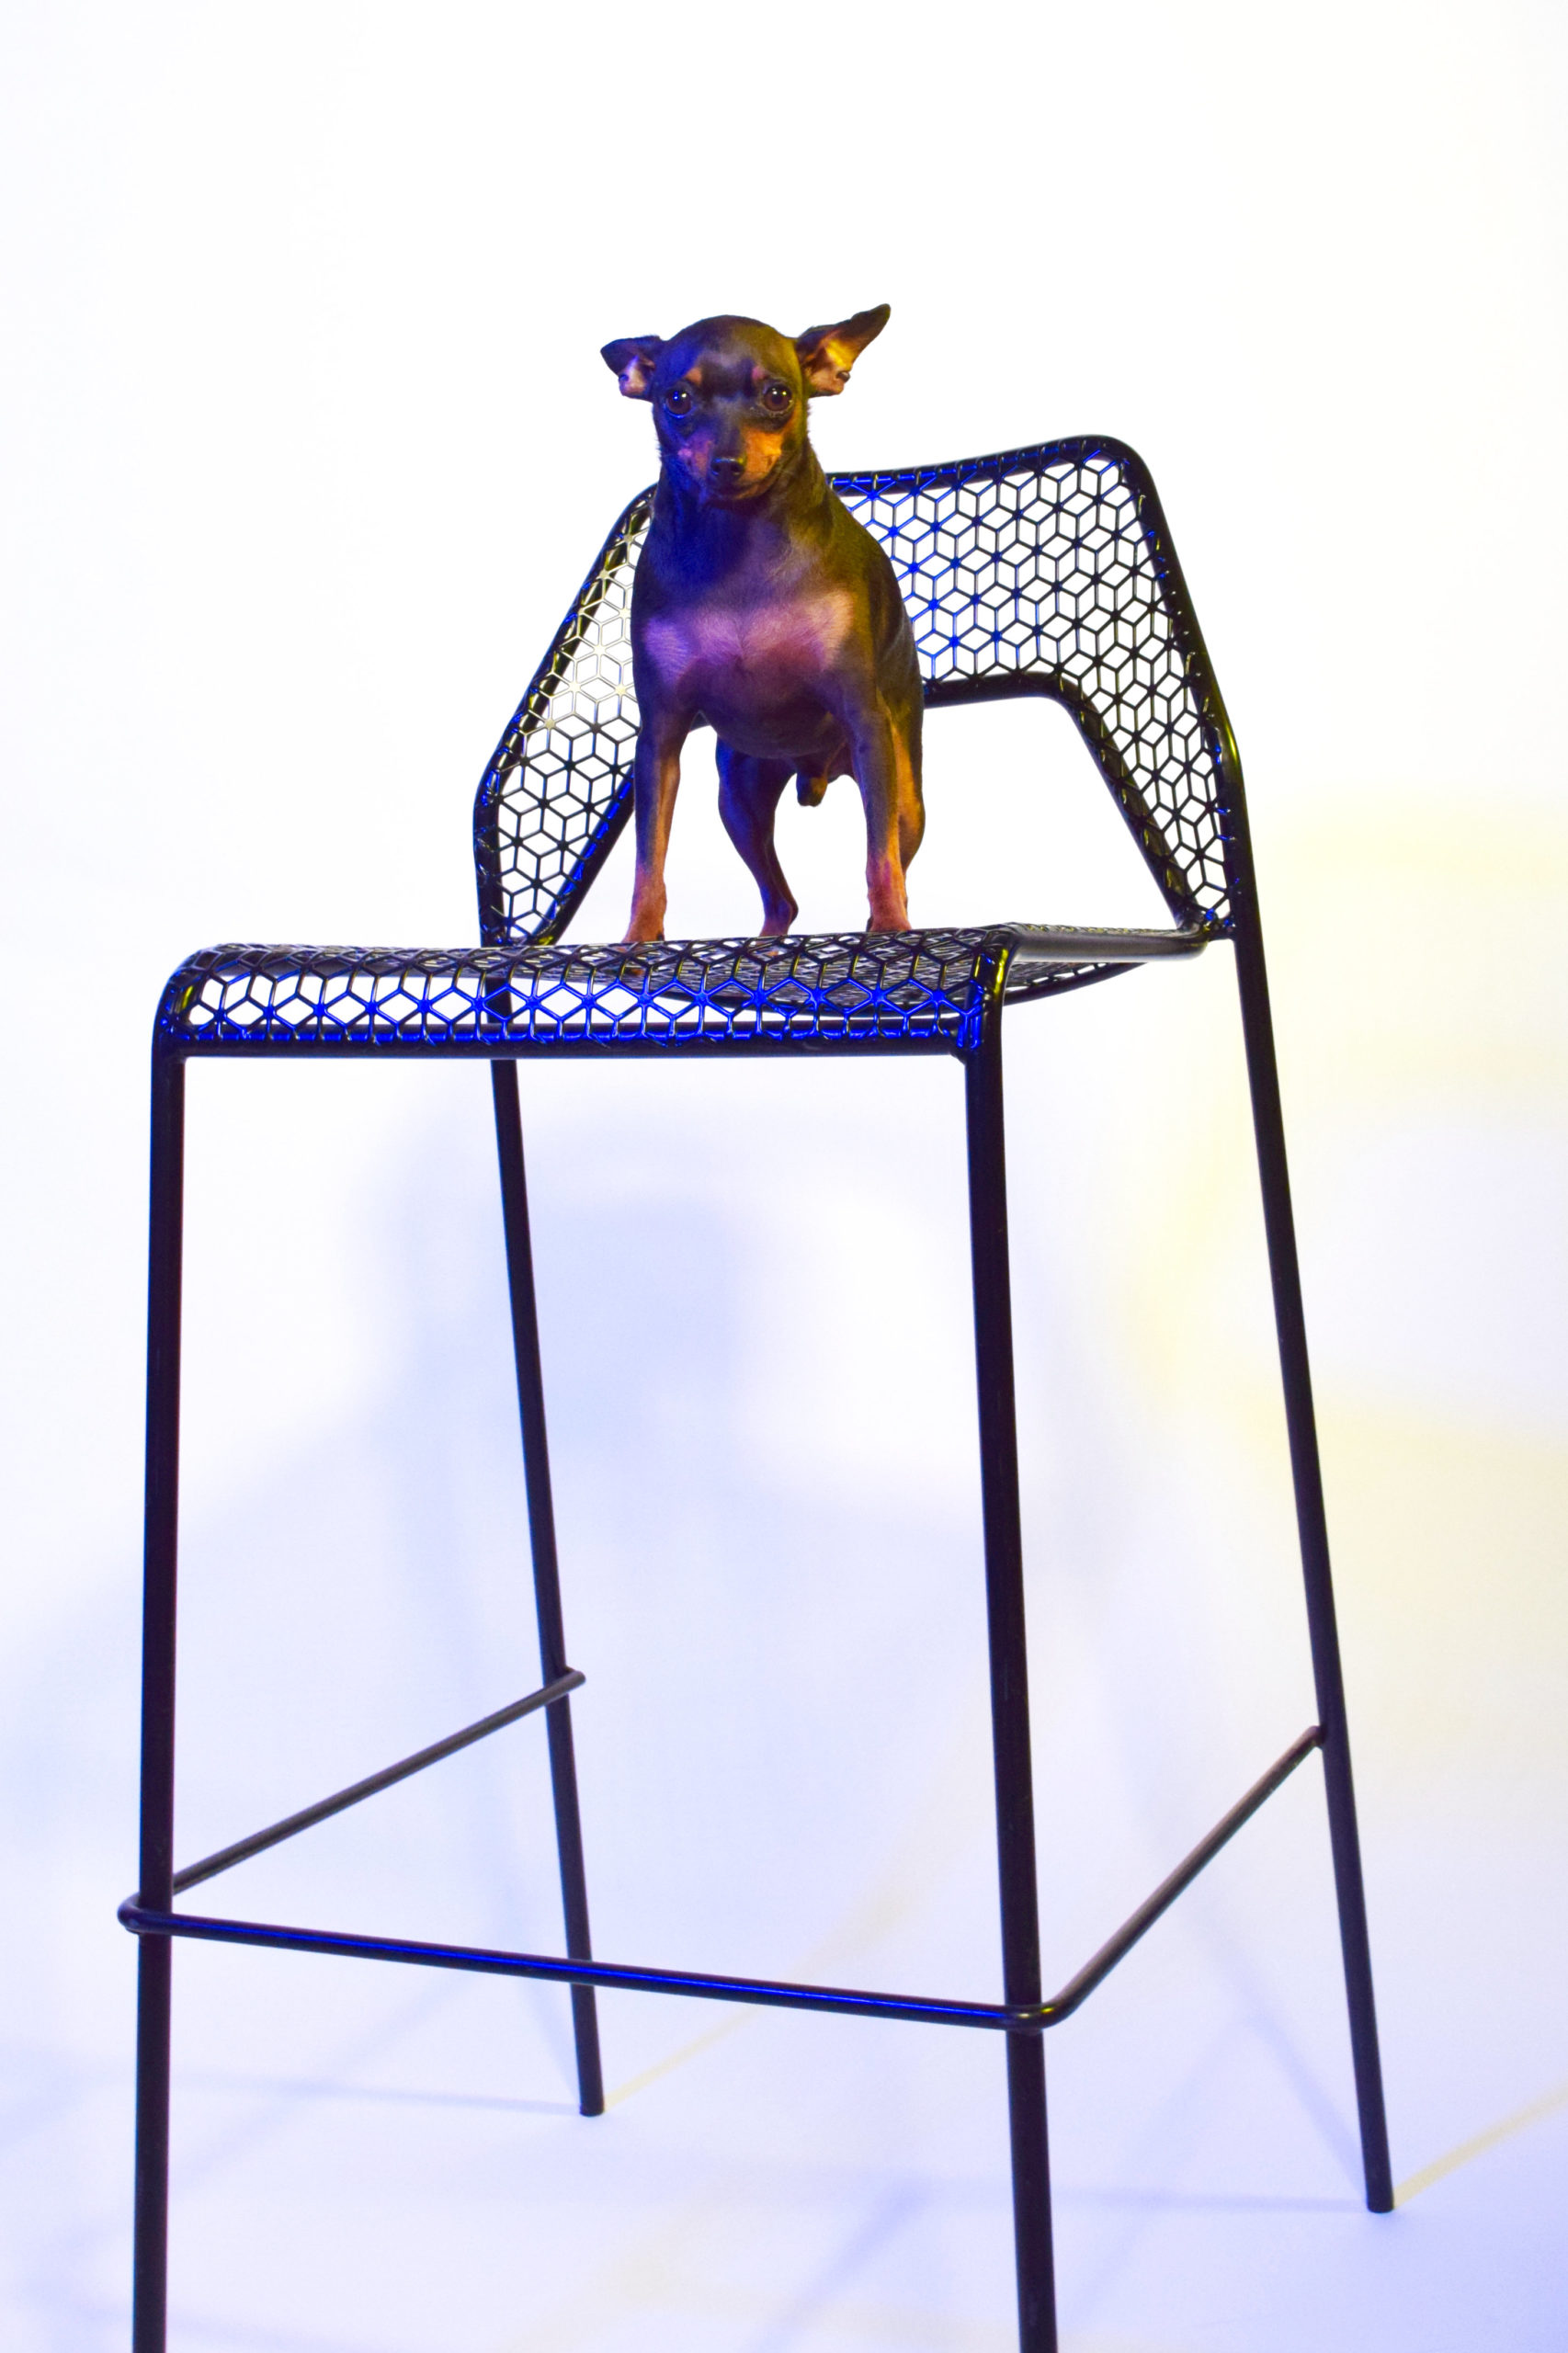 MGS Photoshoots White Seamless Backdrop Small Dog on Chair